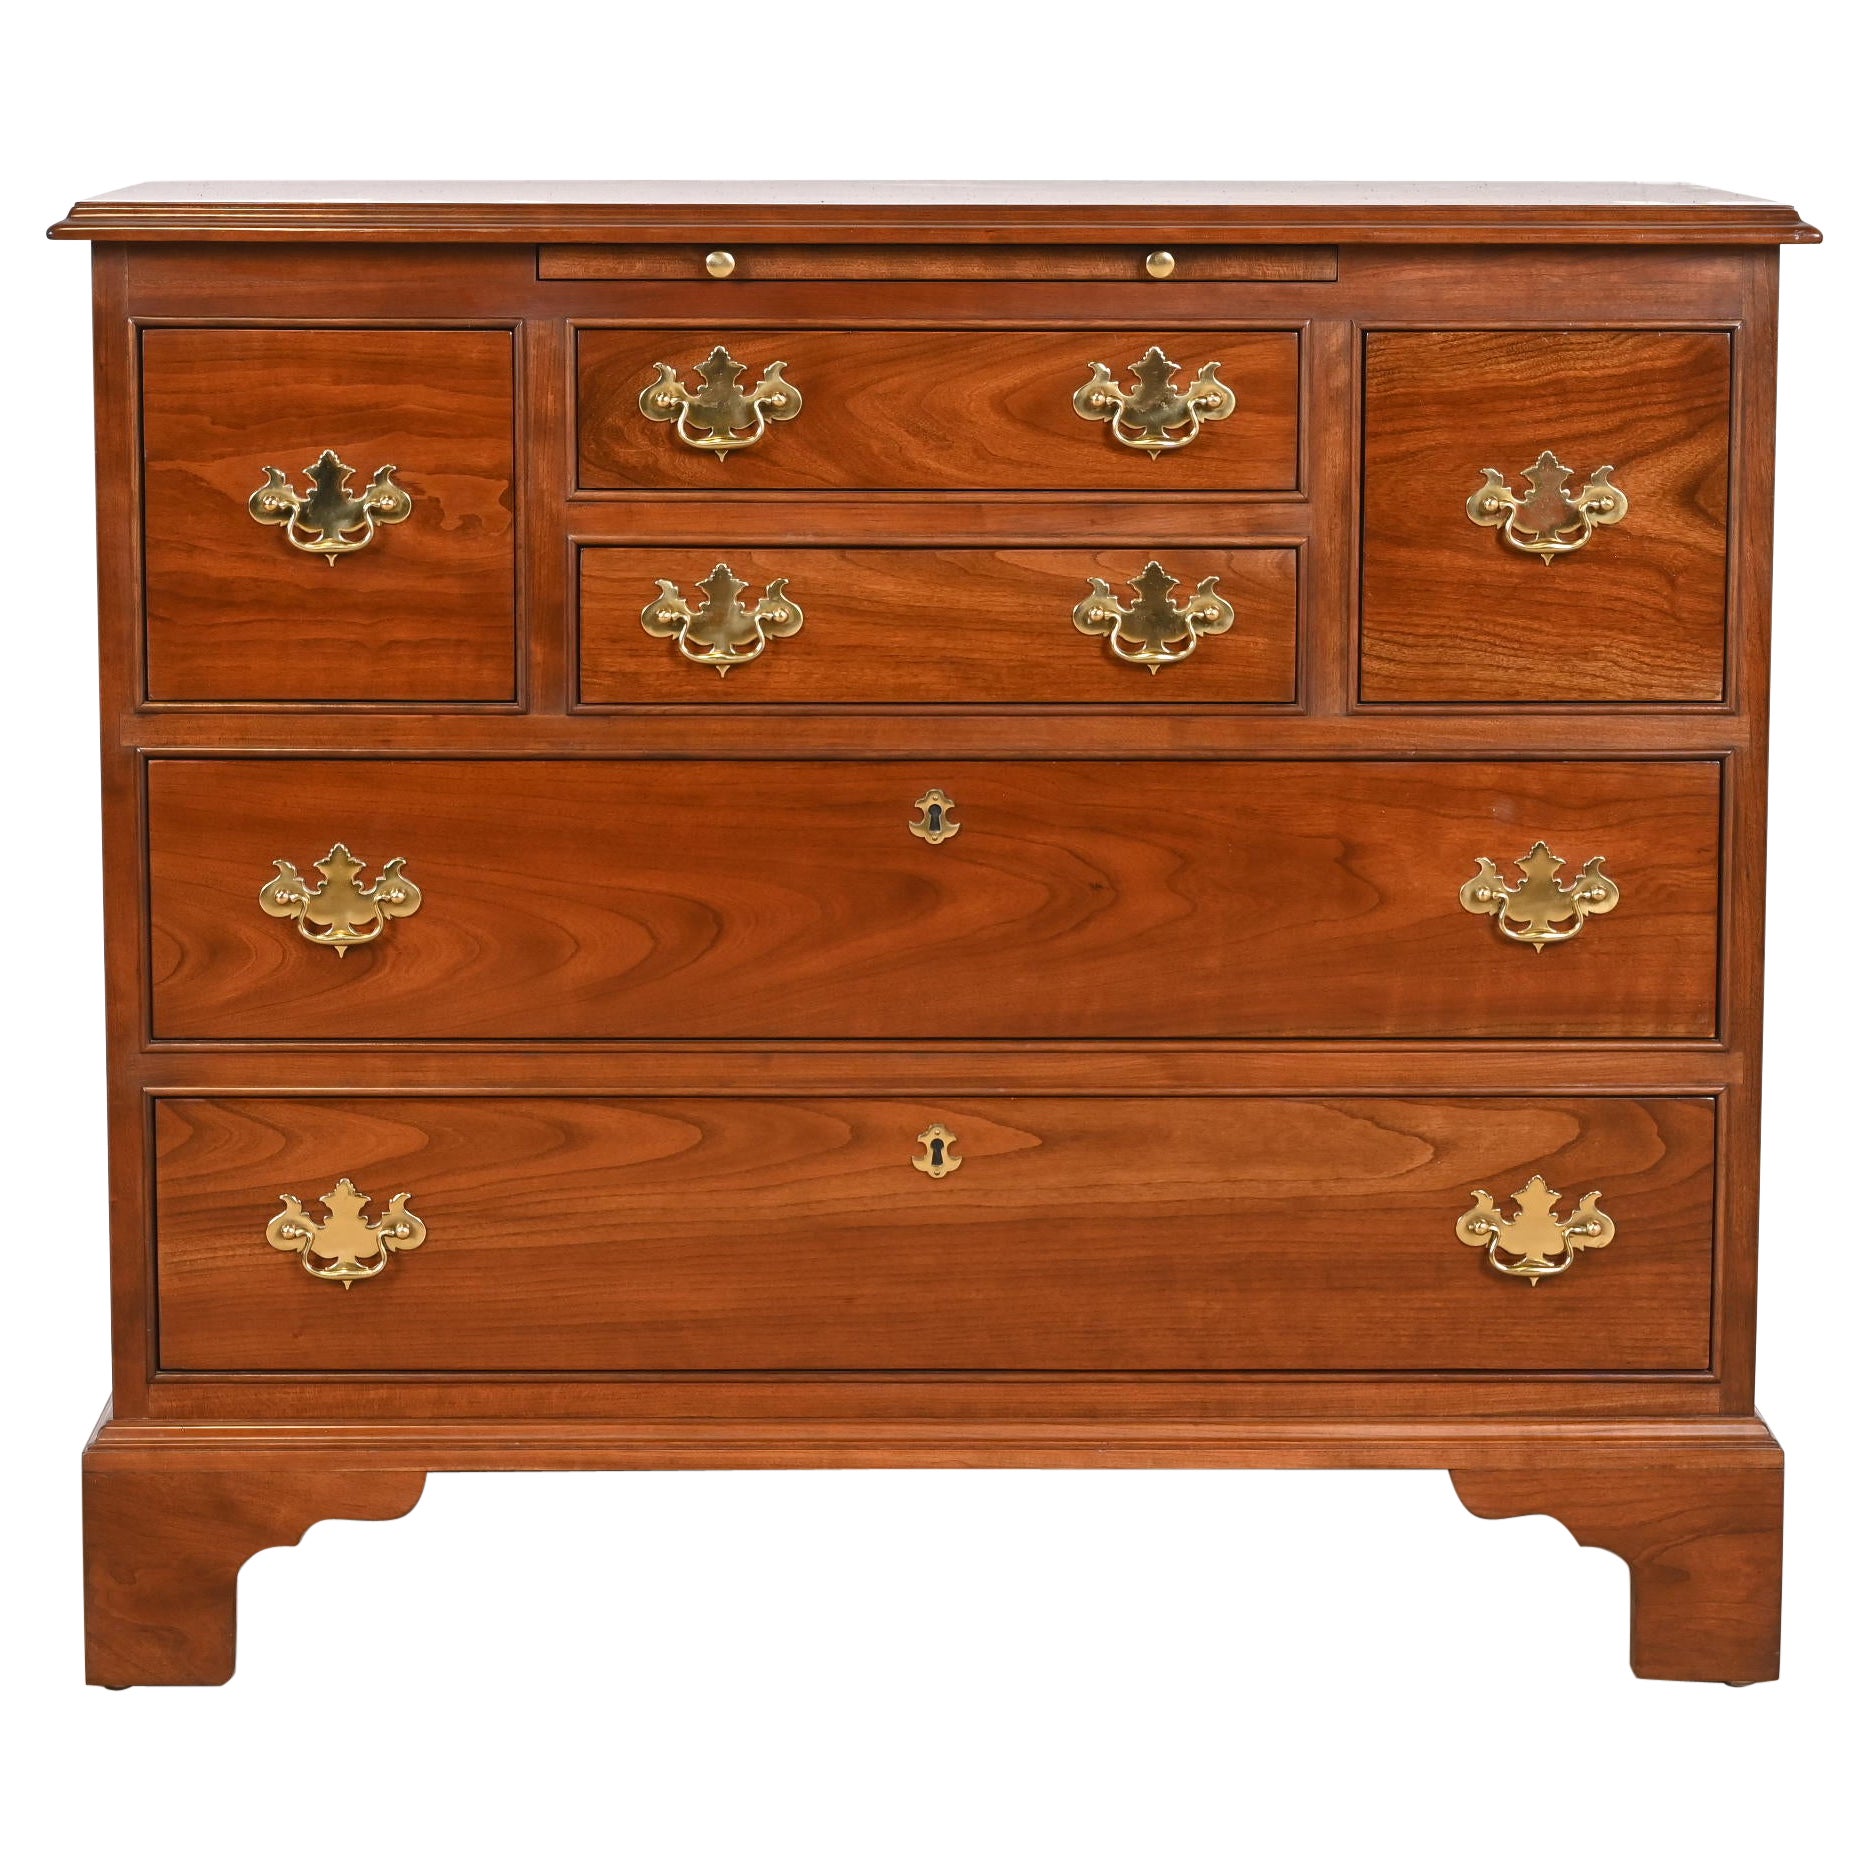 Stickley American Colonial Solid Cherry Wood Chest of Drawers